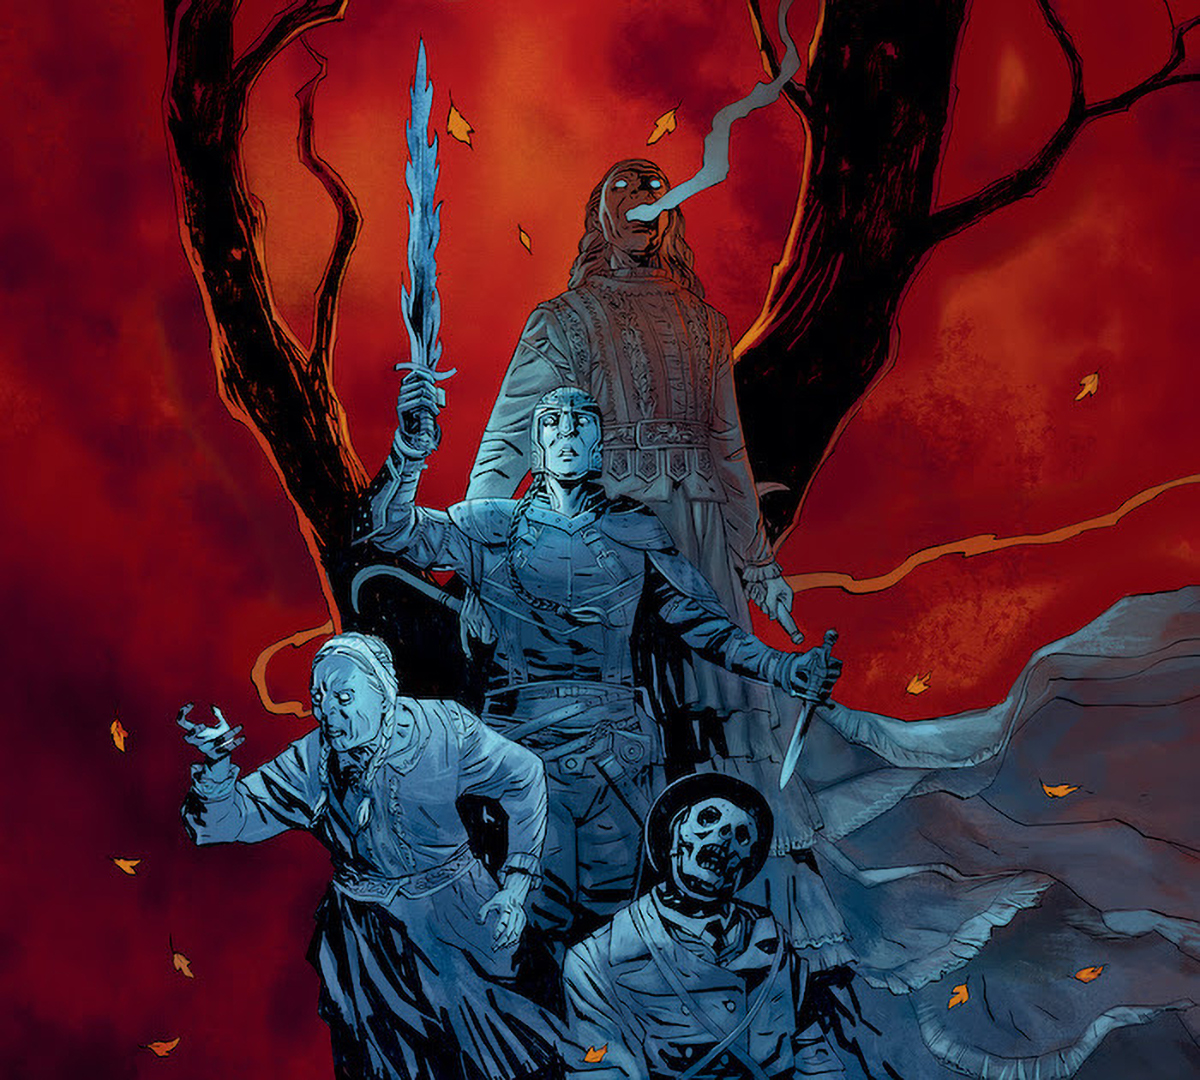 Dark Horse expanding Mike Mignola's 'Baltimore' and 'Joe Golem' with new stories